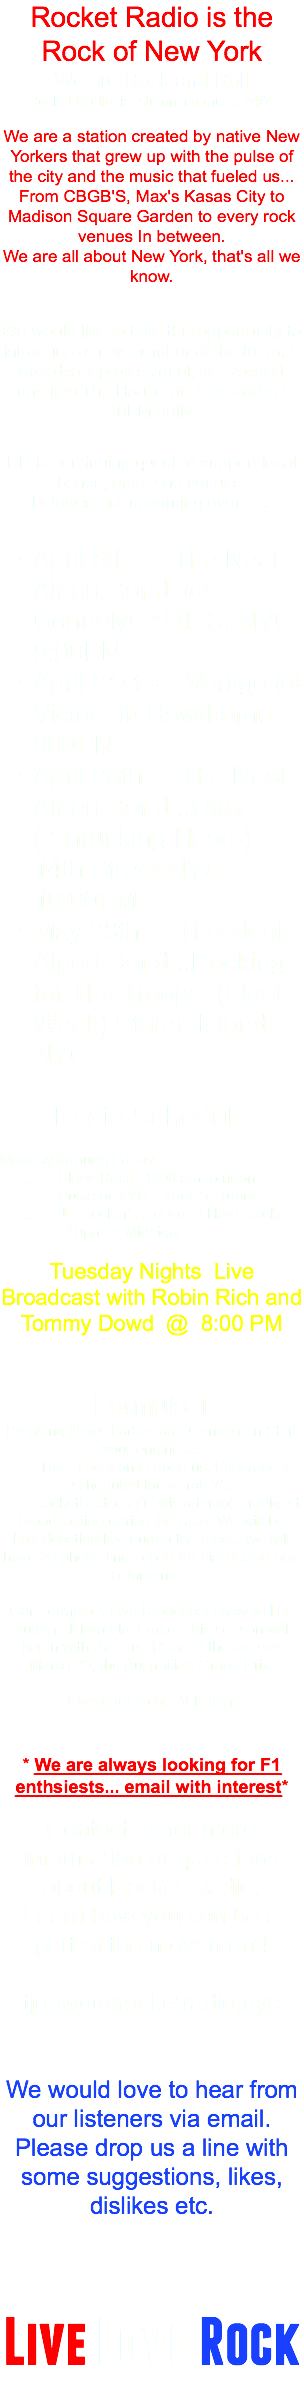 Rocket Radio is the Rock of New York We are Rock and Roll Rocket Radio is streaming music 24/7. We are a station created by native New Yorkers that grew up with the pulse of the city and the music that fueled us... From CBGB'S, Max's Kasas City to Madison Square Garden to every rock venues In between. We are all about New York, that's all we know. We would like to take this opportunity to introduce a new member of the team, a broadcast professional, JC Rocker! Tune into The House of Hard Rocks at 10PM daily. RR is continuing quest to support local bands, artist and venues. Below is our upcoming events... April 6th - The Neal Alpert Band @ Connolys 45th St NYC 9:00PM April 21st - Vertigo @ Victors in Hawthorne 900PM April 26th - The Neal Alpert Band...Ottos ( Shrunking Head ) 14th Street NYC 10:00PM May 28th - The Neal Alpert Band...Rocking for The Troops, (Fleet Week) Staten Island, NYC Radio Schedule Monday through Friday ....... Blues Rock - 8:00 am to noon ....... Pulse of NYC - Noon to 10pm ....... JC Rocker's House of Hard Rocks 10pm to Midnight Tuesday Nights Live Broadcast with Robin Rich and Tommy Dowd @ 8:00 PM Formula 1 Breaking News Ladies and Gentleman Start your engines... The Fi season is upon us. First race is scheduled for March 25. RocketRadio.NYC will attempt simulcast broadcasting during the race. We will be broadcasting live during the races, we will have 25 phone lines open for discussion and comments... Our Formula 1 Live Broadcast show will be during all formula 1 races this season will begin with the First Race of the season March 25, the Austrailian Grand Prix. Check for local TV listings * We are always looking for F1 enthsiests... email with interest* Contact us for more information or questions about Rocket Radio. Learn how you can be a part of the movement! tjdowd@rocketradio.nyc We would love to hear from our listeners via email. Please drop us a line with some suggestions, likes, dislikes etc. Live Love Rock